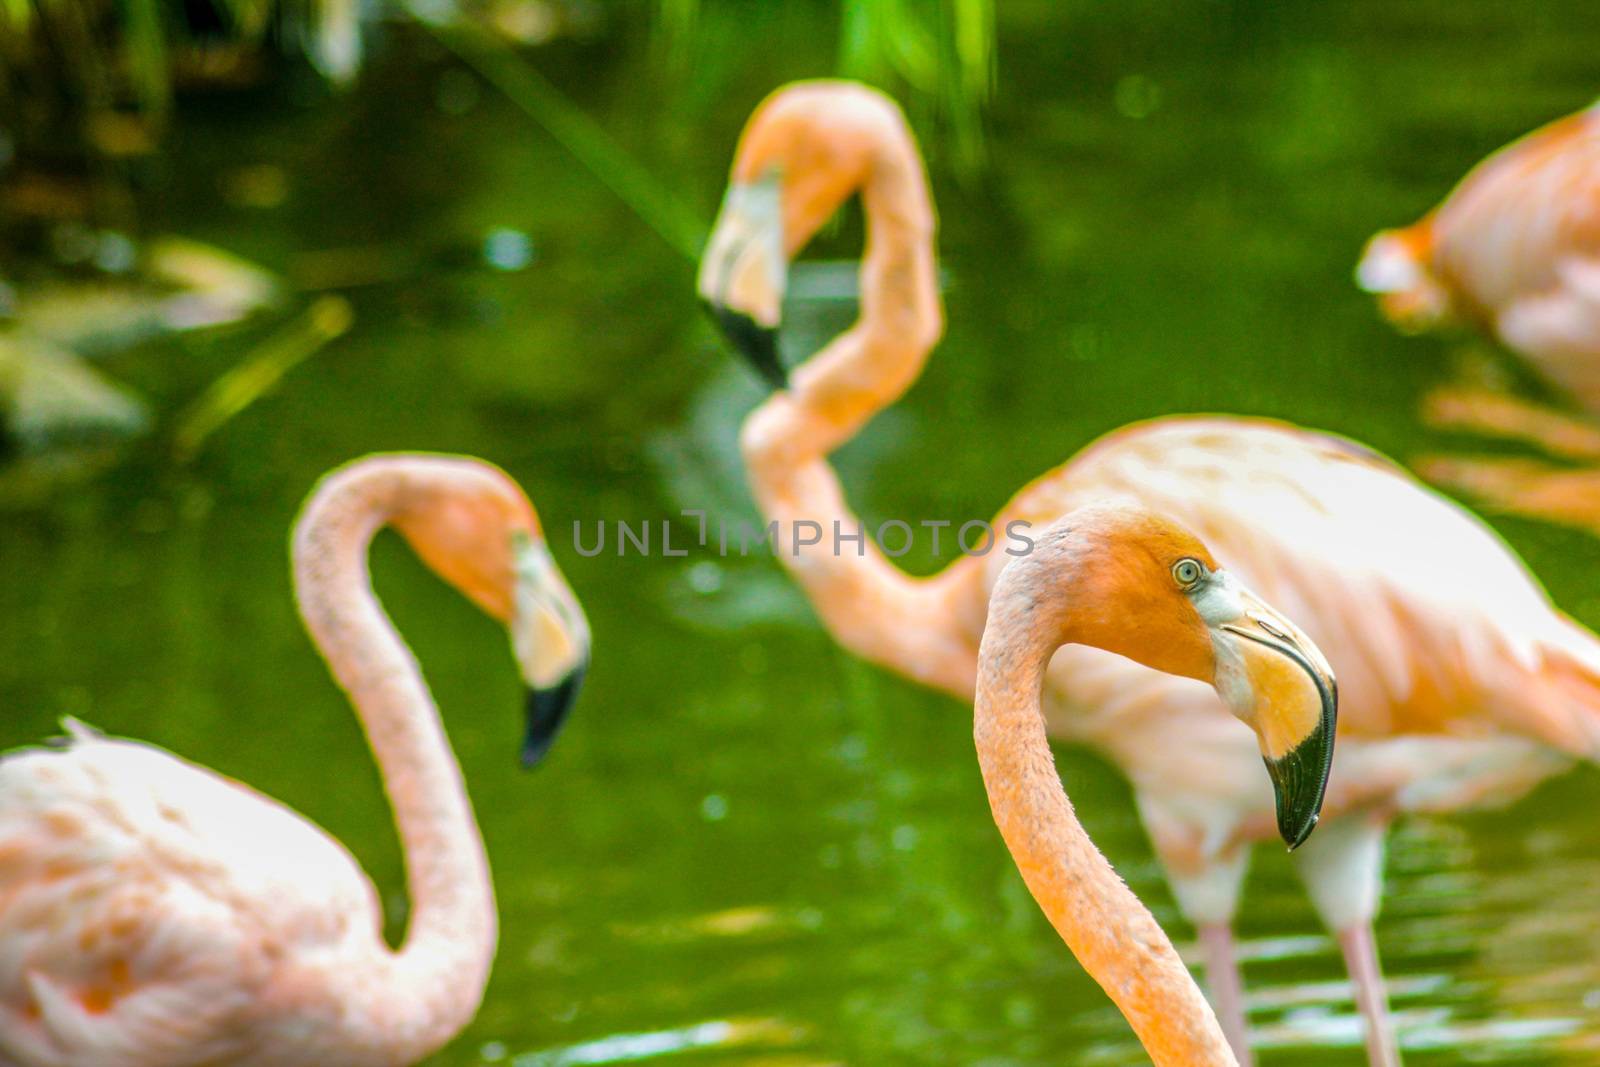 Pink flamingos perched in a pond in the Dominican Republic